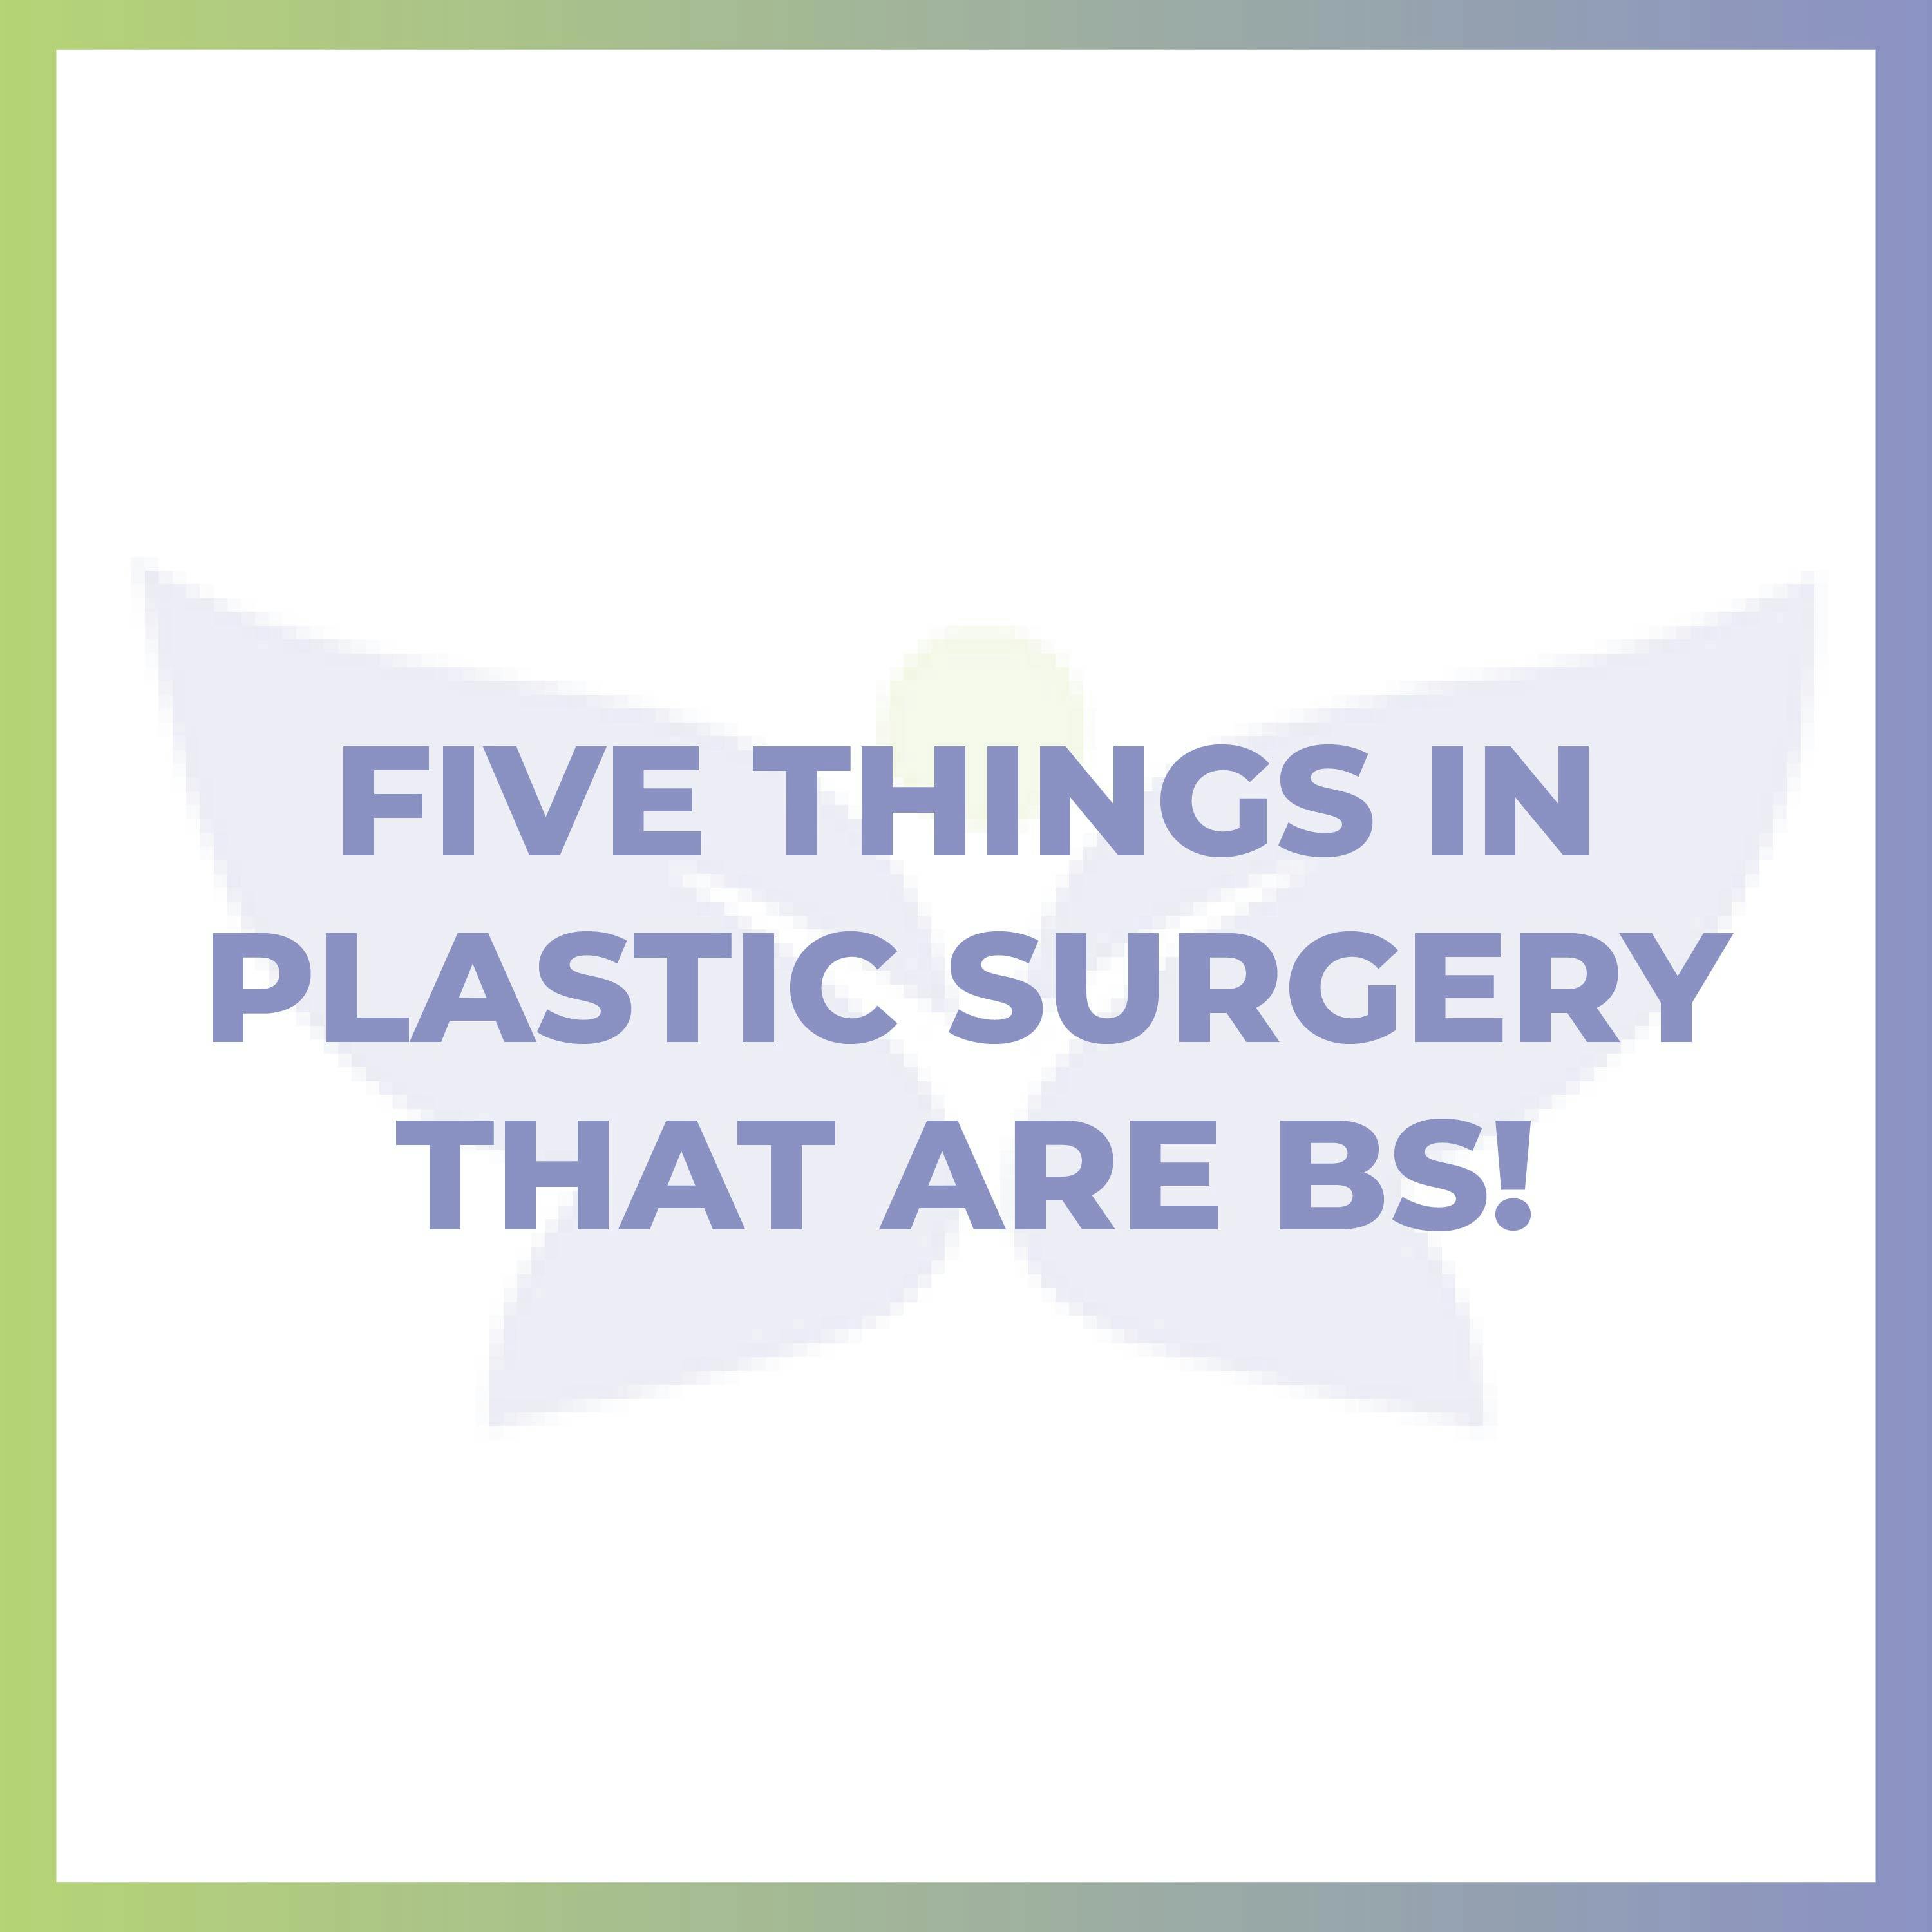 Five Things in Plastic Surgery That Are BS!